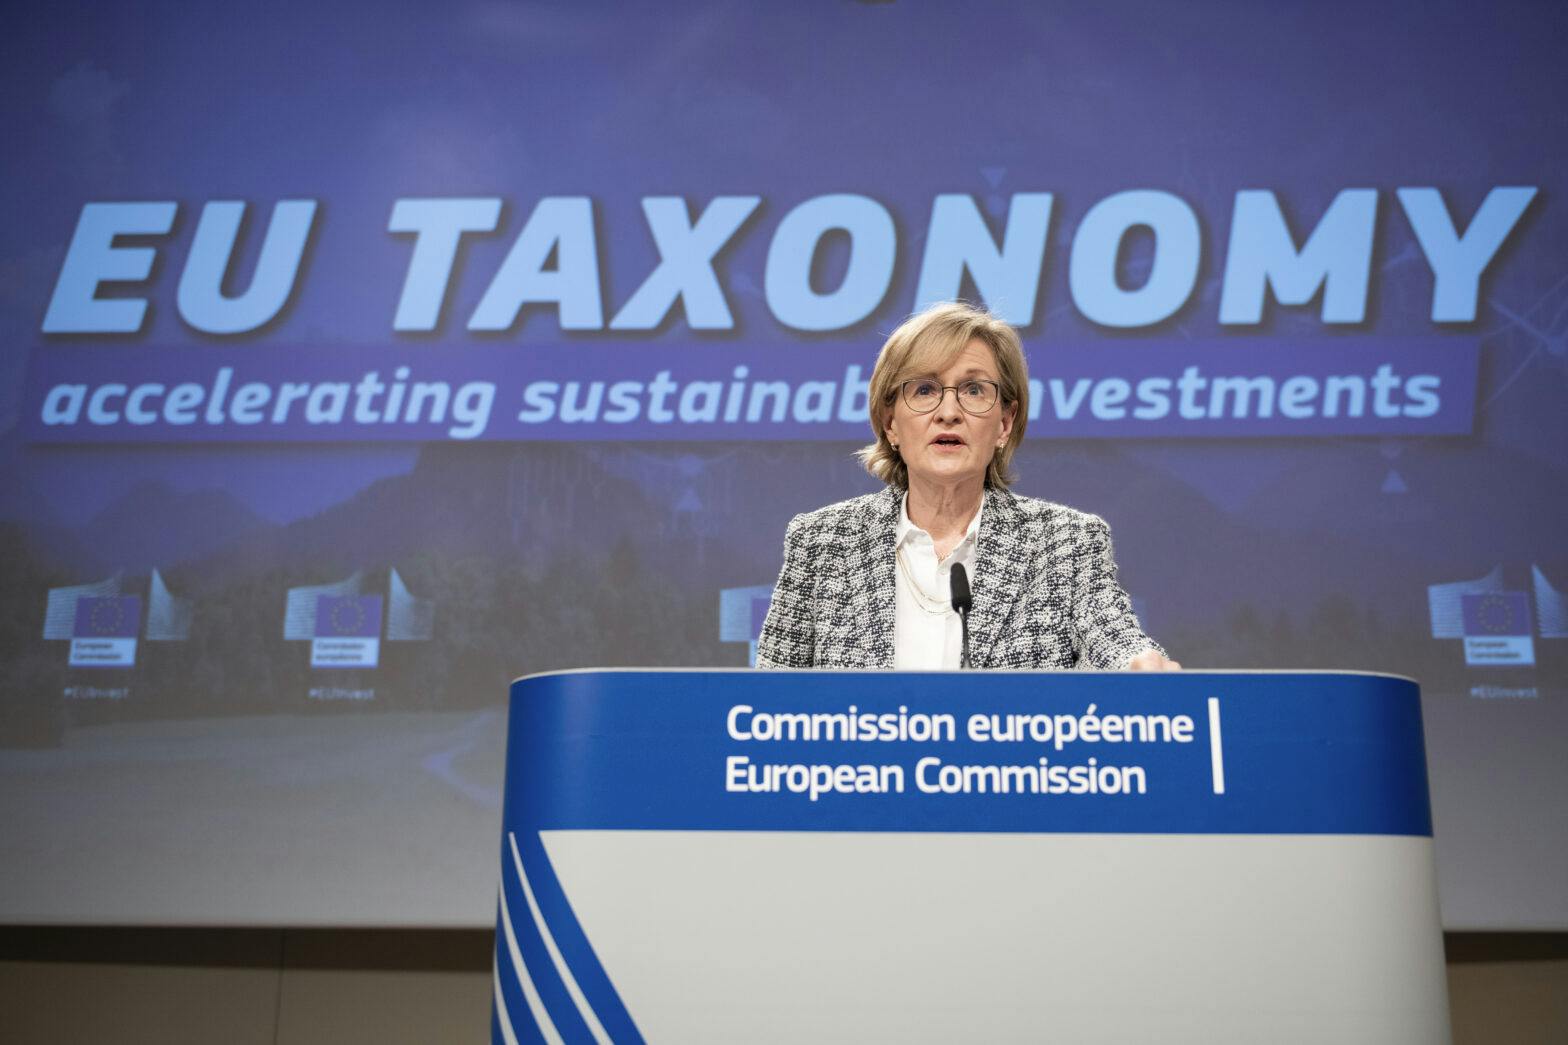 Mairead McGuinness, European Commissioner for Financial Services, Financial Stability, and Capital Markets Union, holds a press conference on taxonomy, following the weekly meeting of the von der Leyen Commission in Brussels.